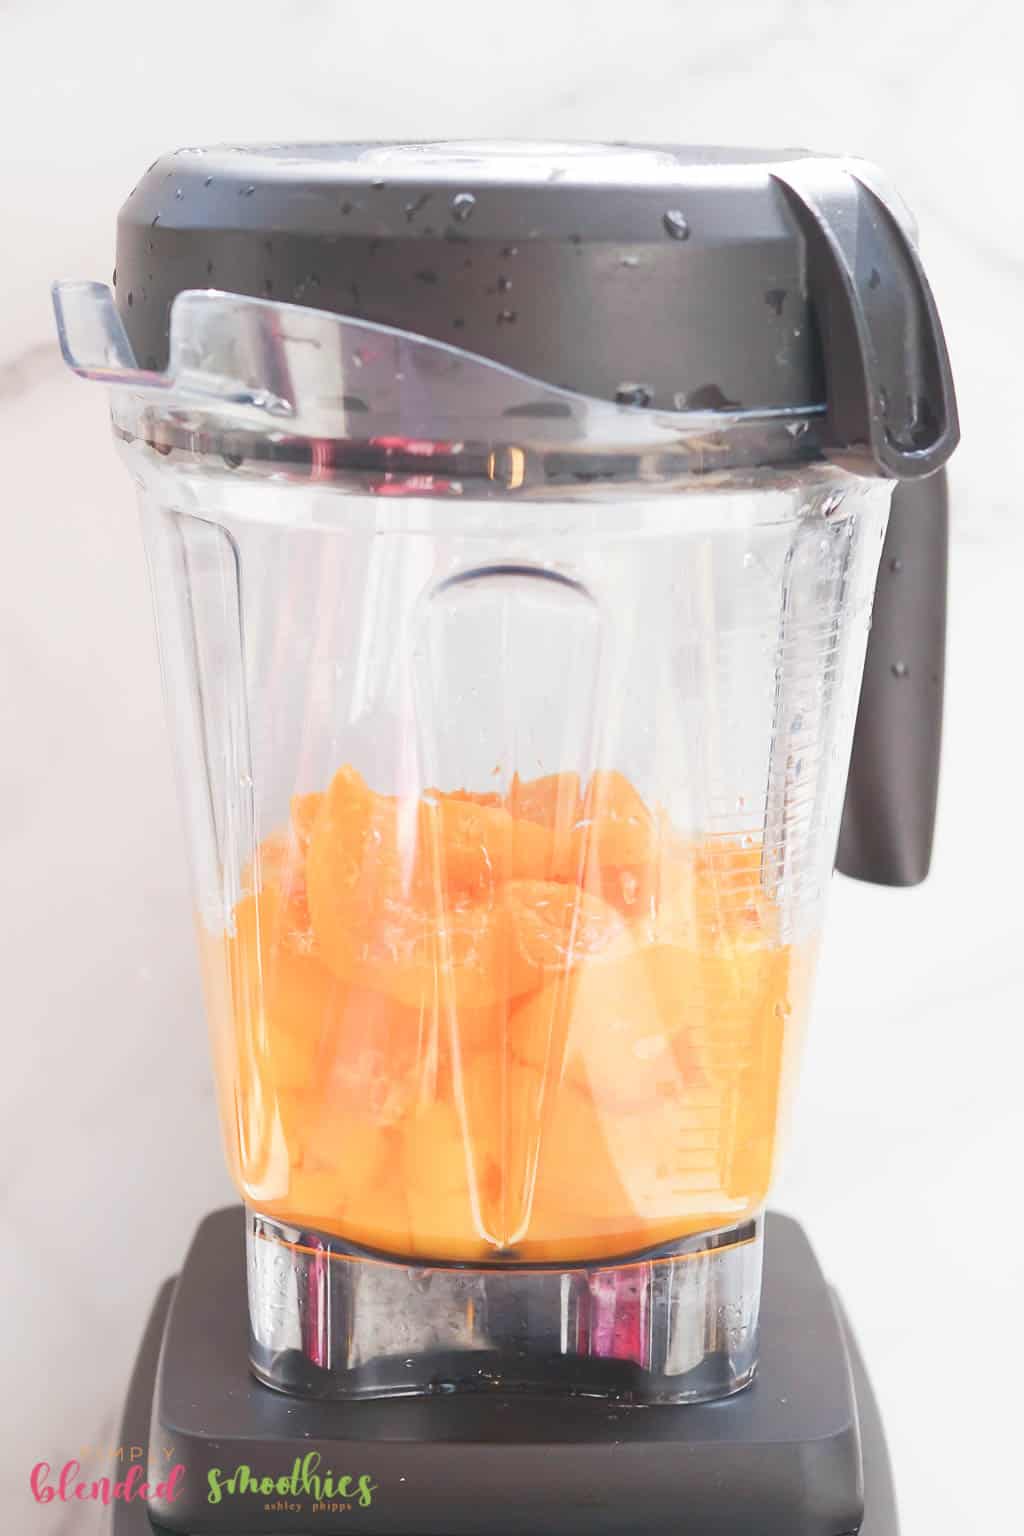 Looking At The Side Of A Blender With Mangos And Peaches In It